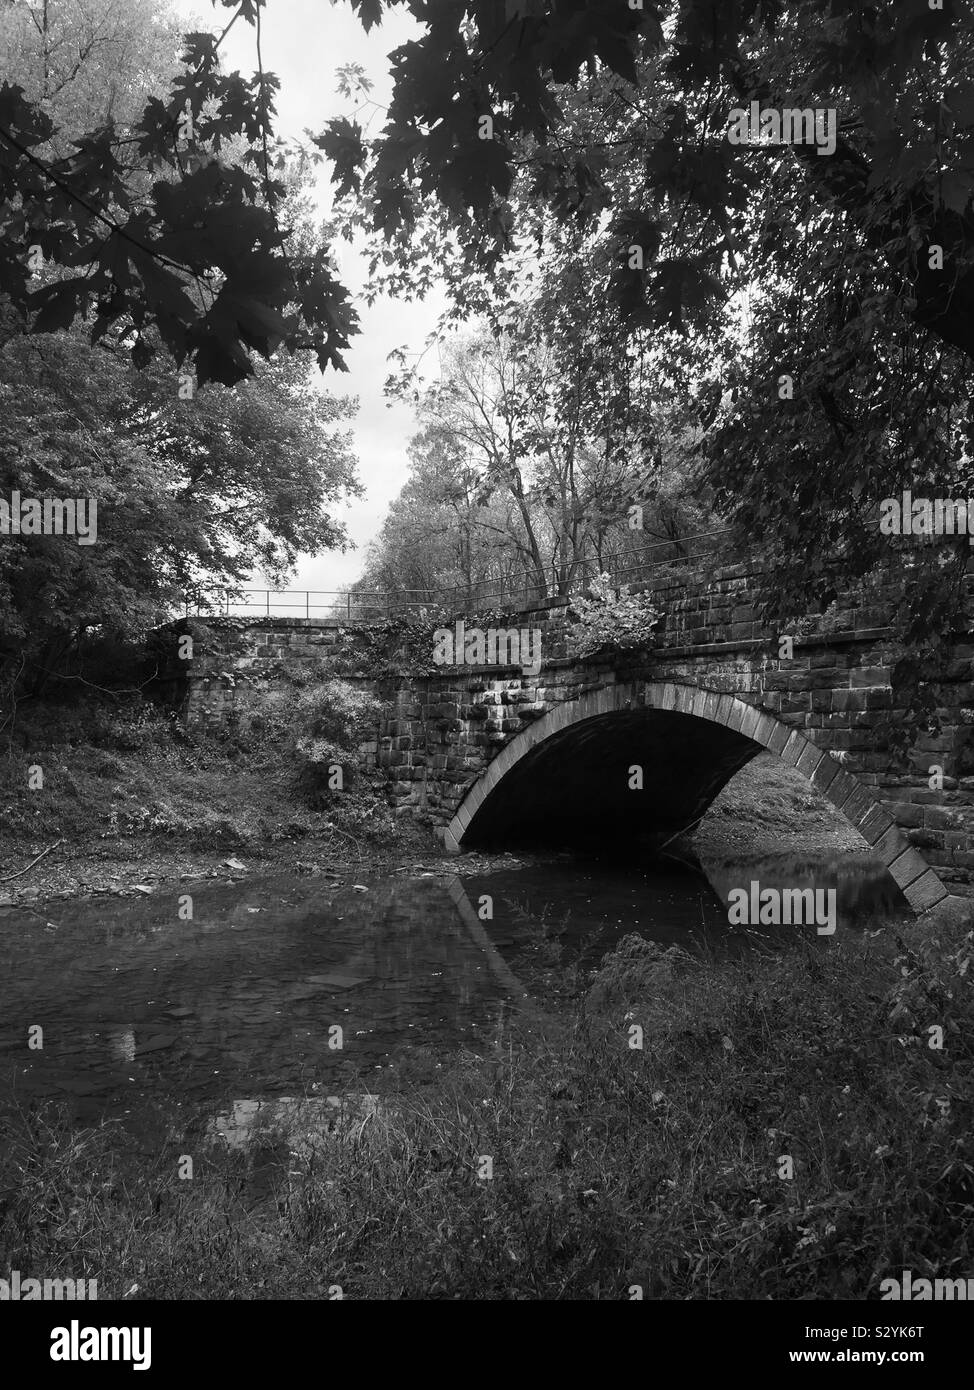 Arched stone bridge over river in black and white. Stock Photo